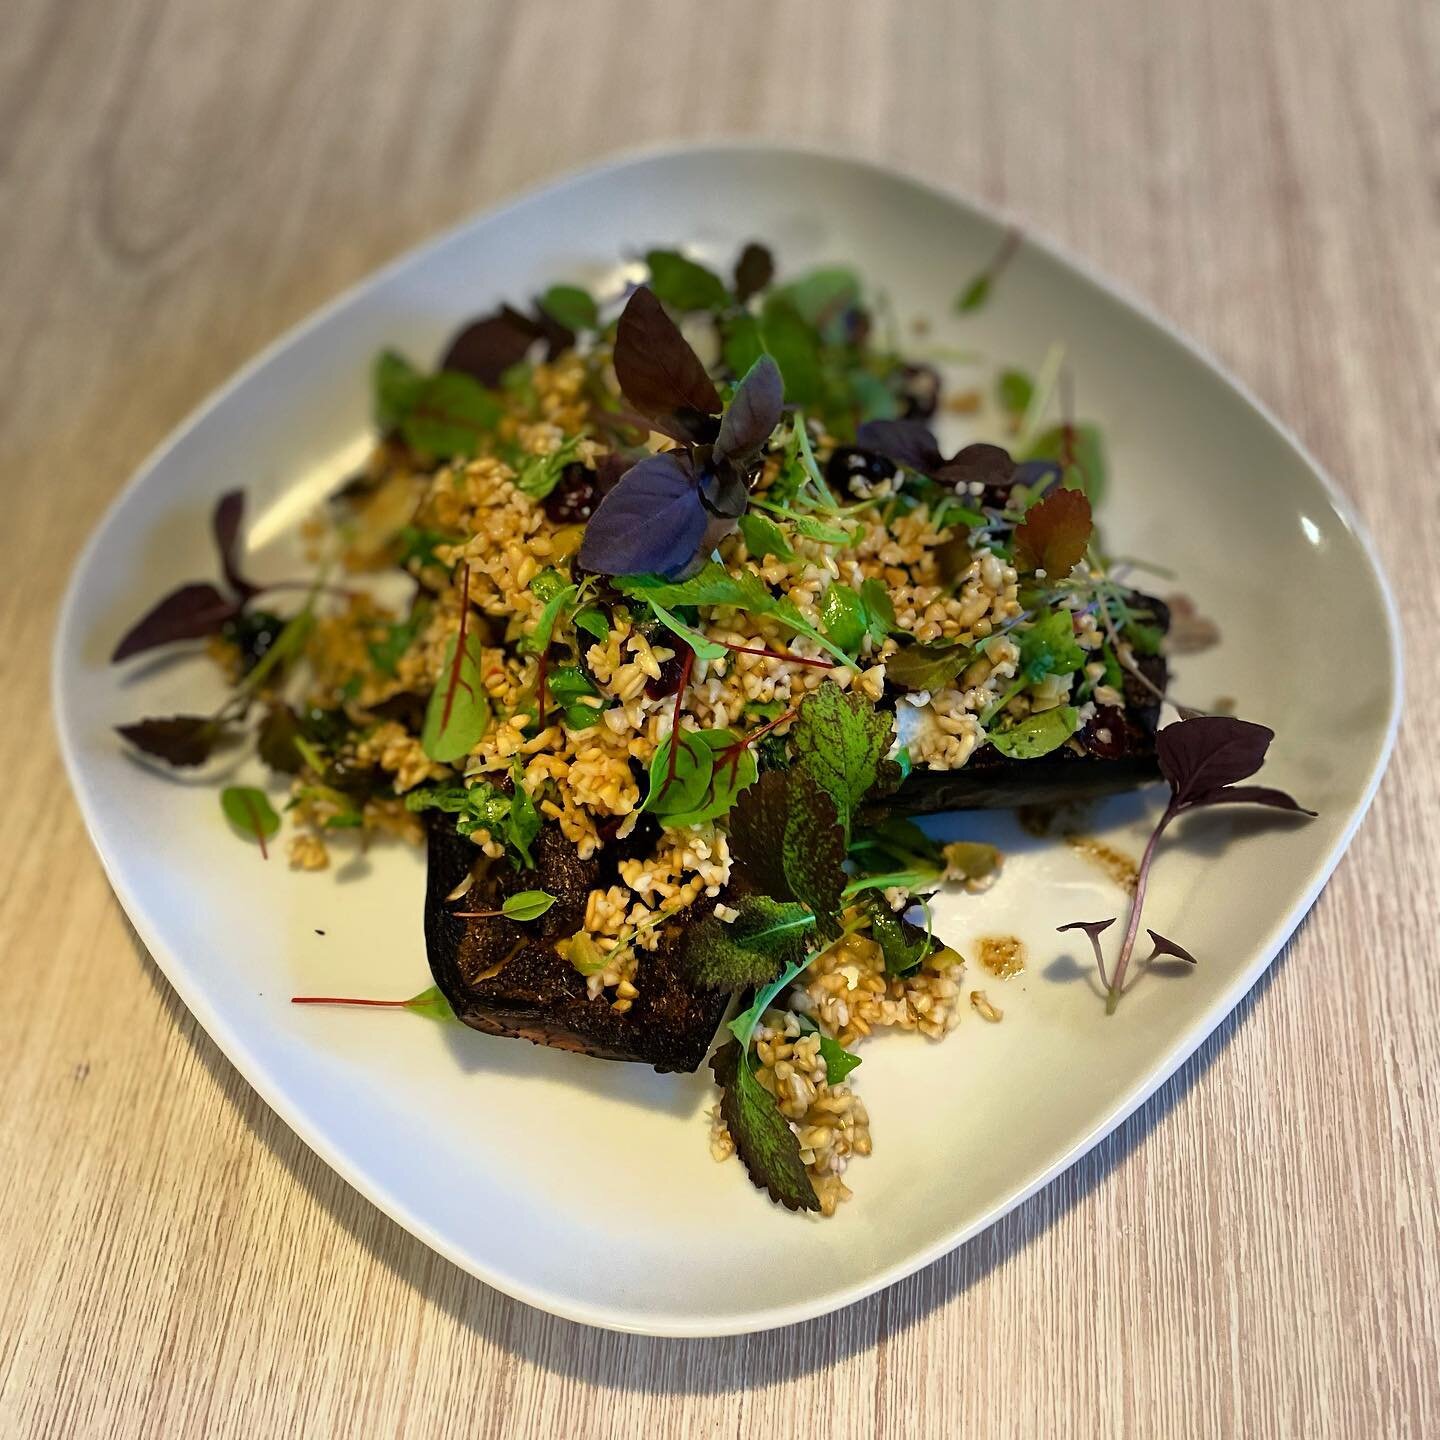 On the menu tonight! Roast eggplant with lazy chefs Ras el Hanout, served with a bulgur salad of raisins, shaved almond, green olives, preserved lemon, soft herbs  and finished with Purple and Genovese Basil, Red Sorrel and red mustard leaves 🍃 🍁 ?